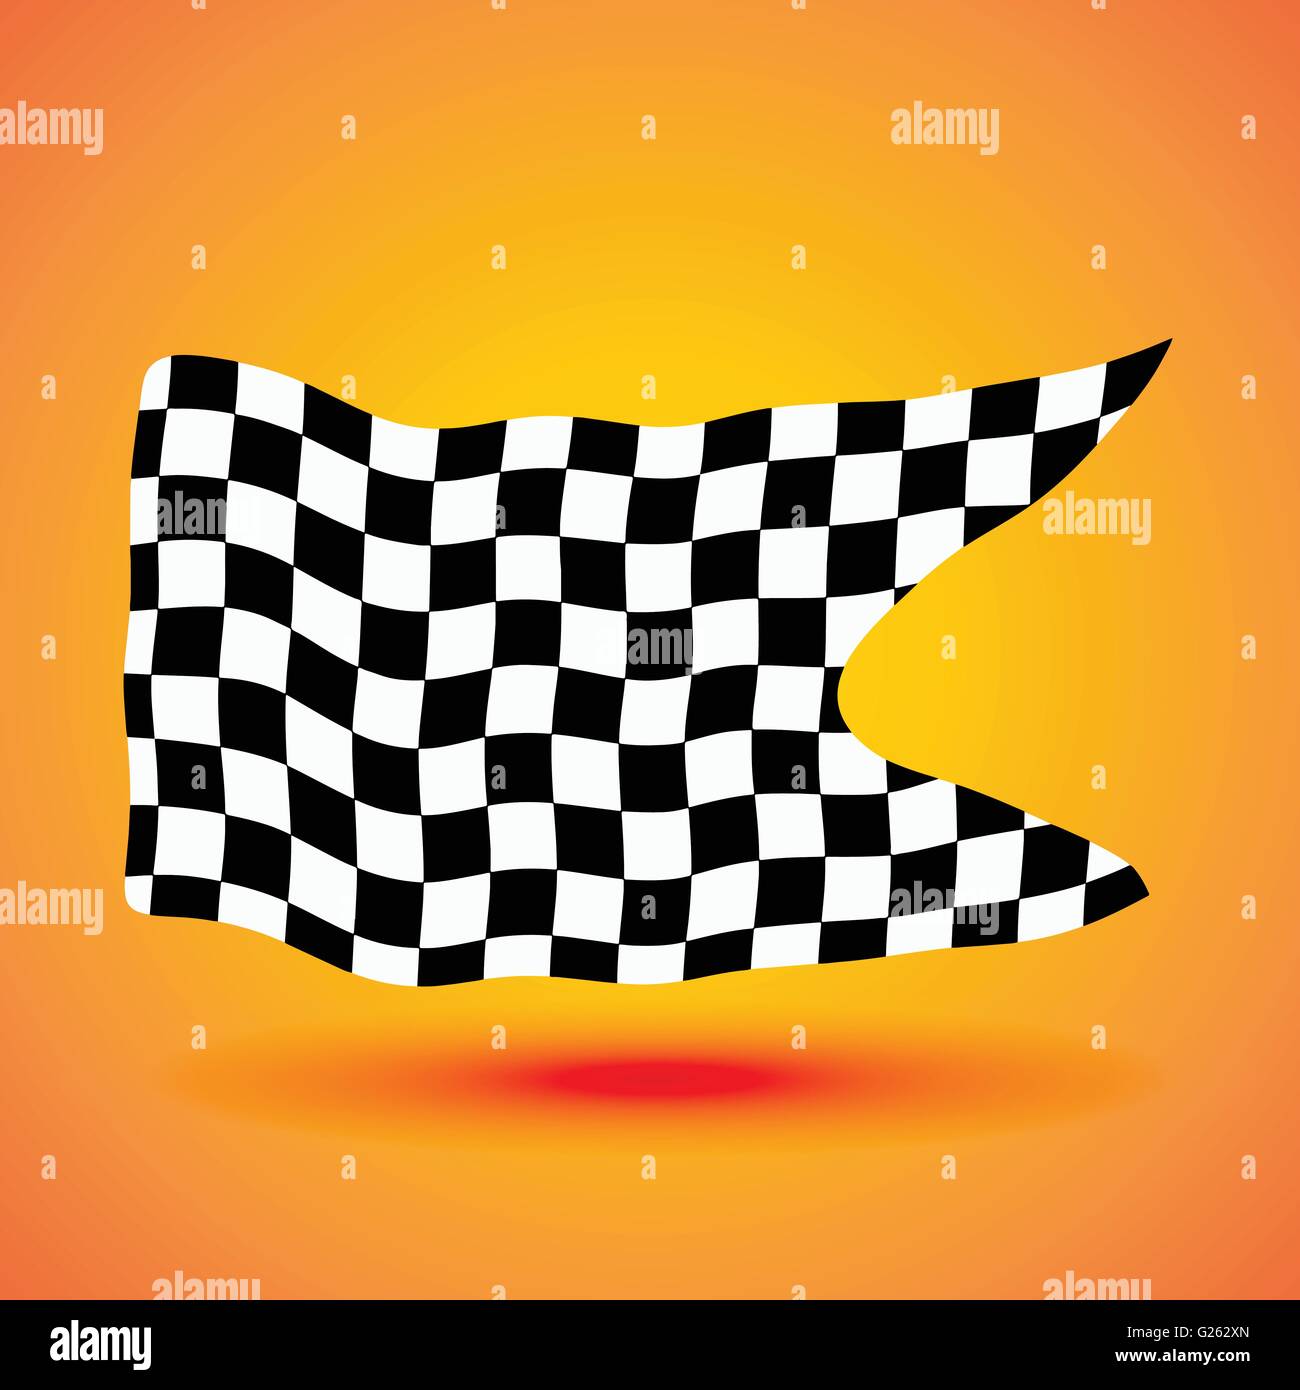 Racing background with checkered flag vector illustration Stock Vector